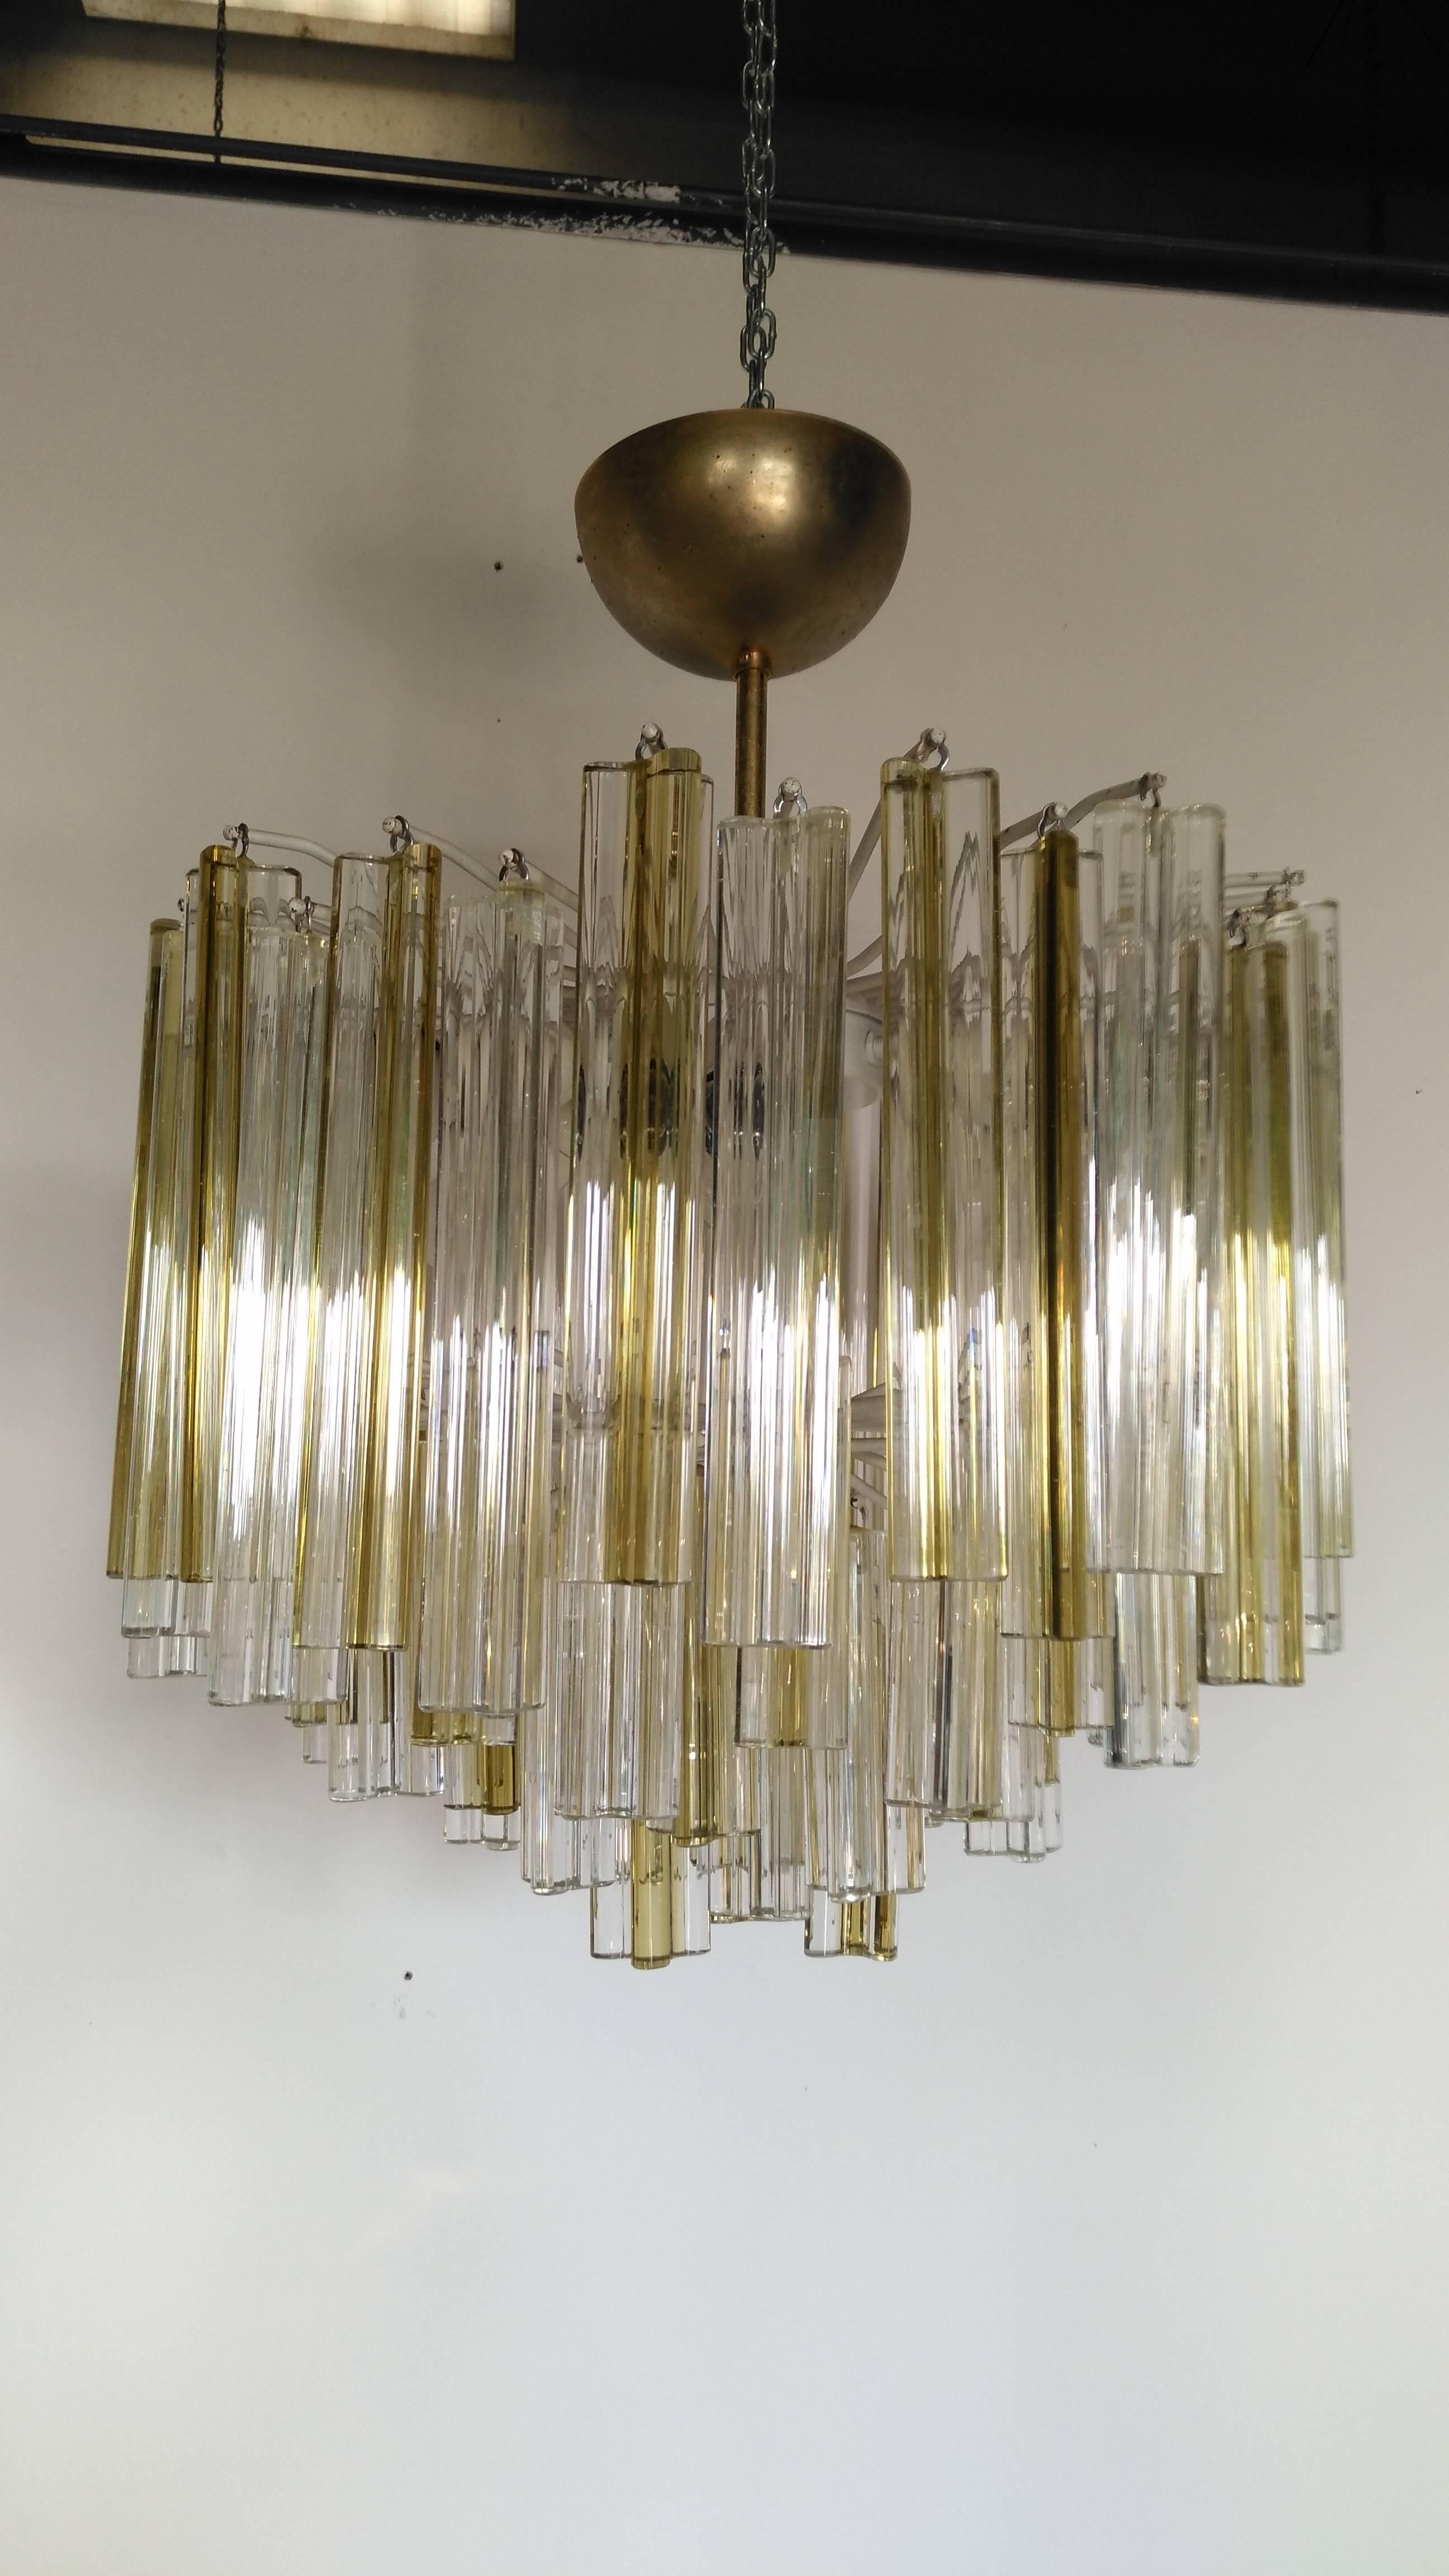 Beautiful lot of four chandeliers, trilobo transparent glass with yellow rod glass inside
Beautiful model manufactured by Venini in 1960, very in testing lot of four chandeliers original and complete in all parts
Dimensions: Diameter cm 55 x height